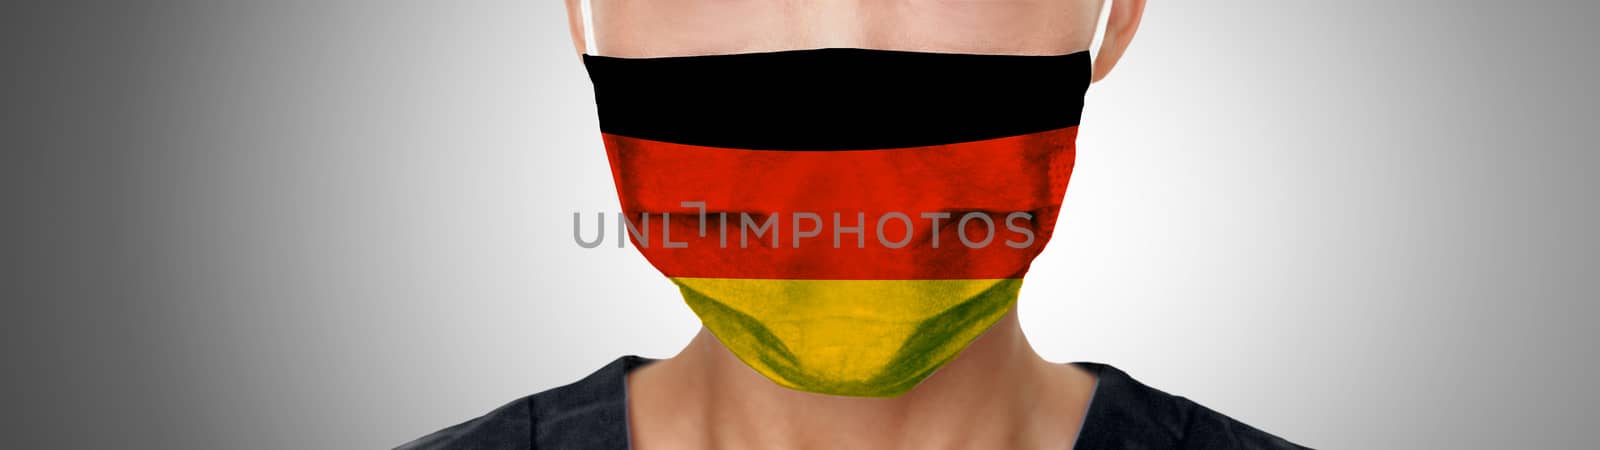 German COVID-19 masks flag on PPE doctor wearing mask panoramic banner. Coronavirus pandemic outbreak in Germany. Graphic design illustration print on medical personal protective equipment by Maridav